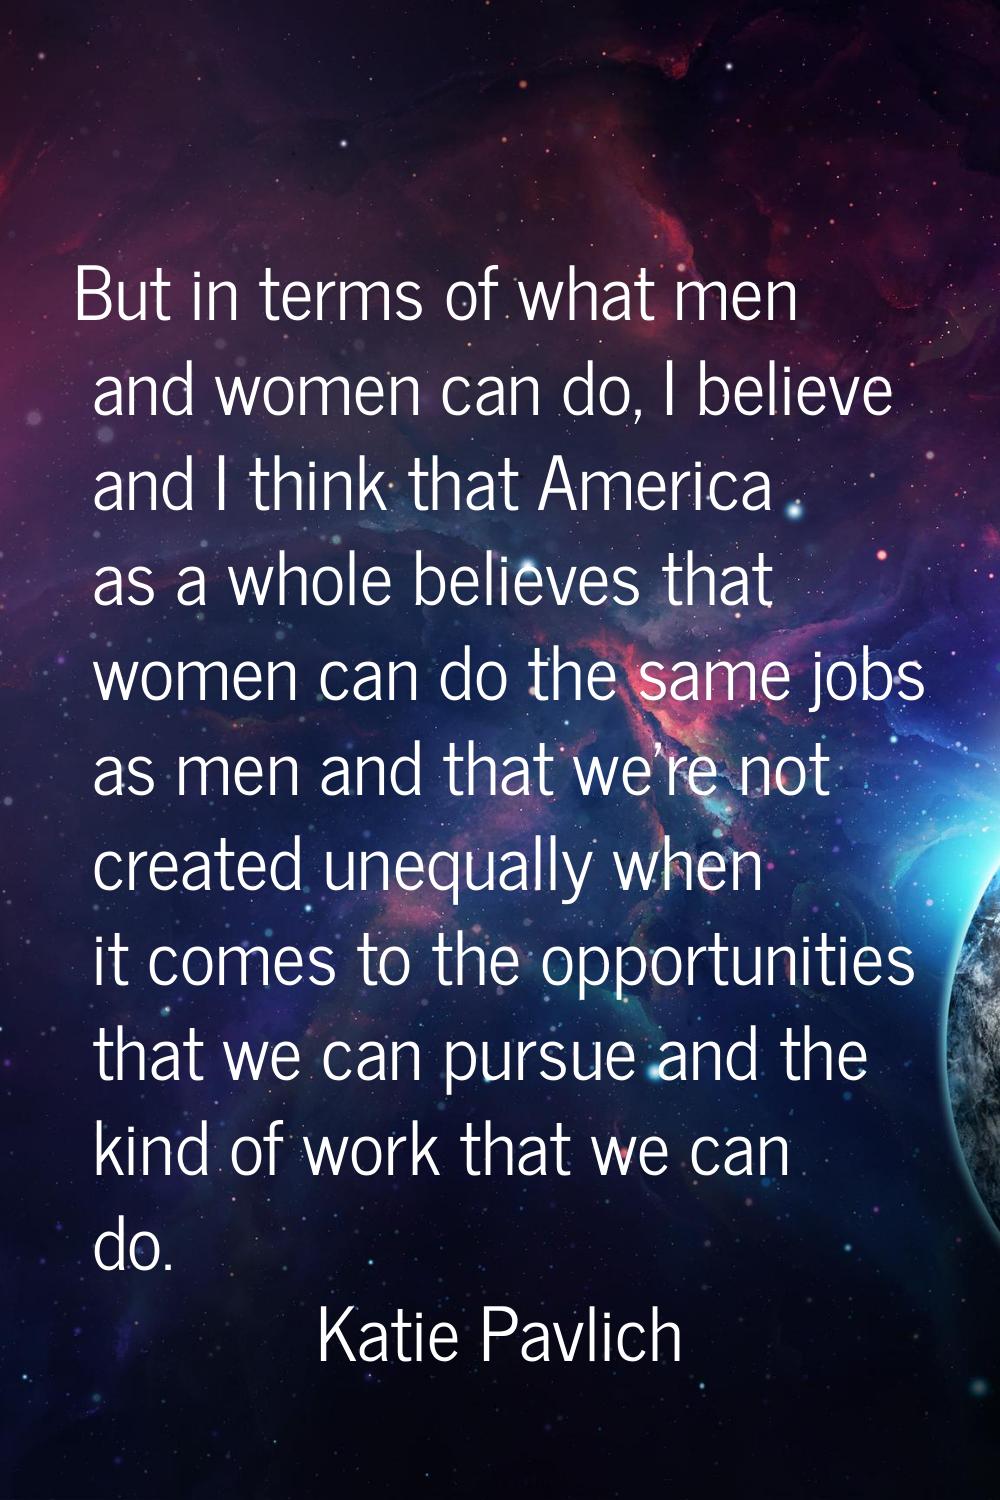 But in terms of what men and women can do, I believe and I think that America as a whole believes t